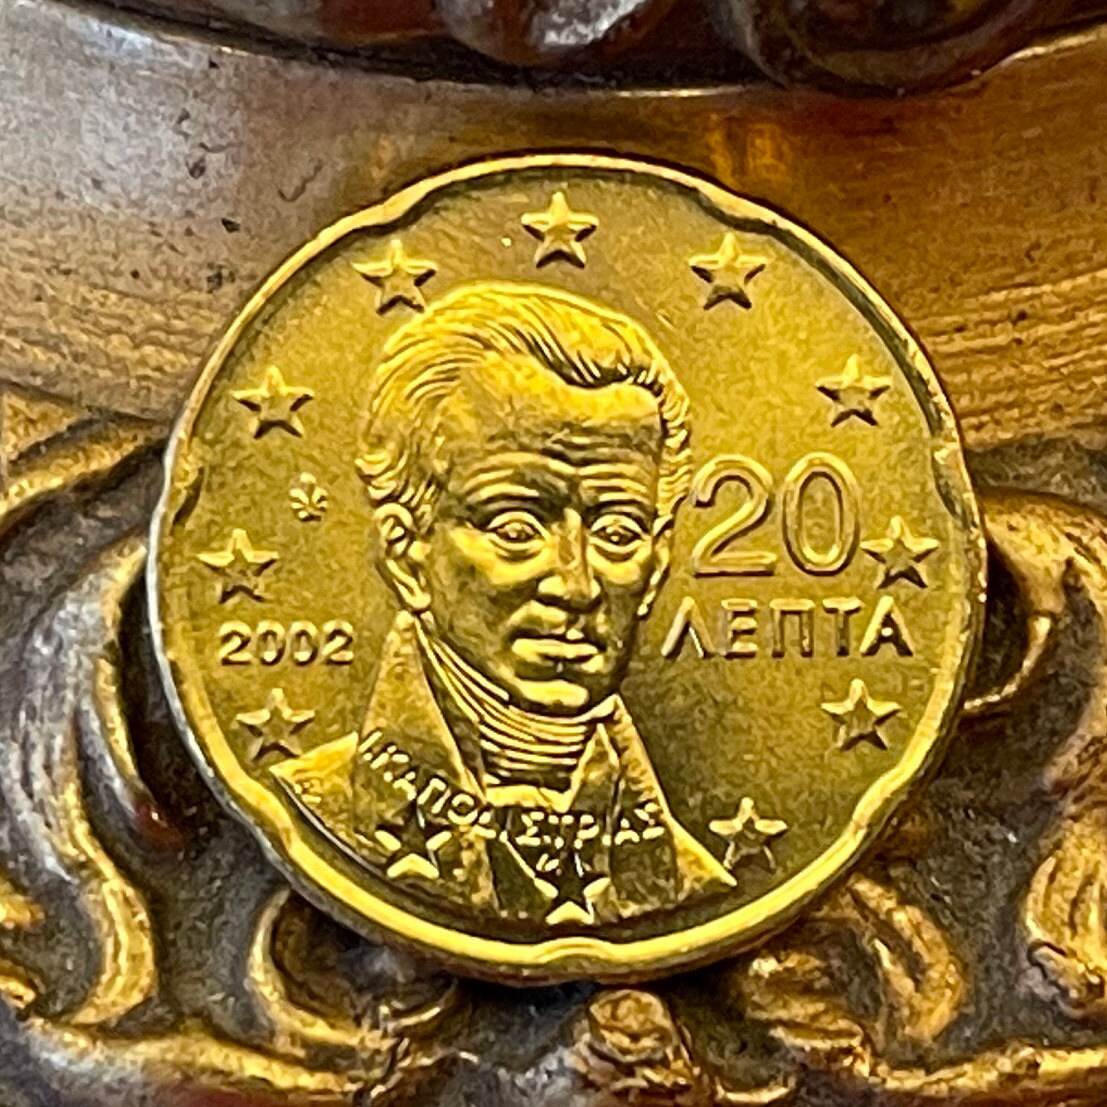 Count Ioannis Capodistrias 20 Euro Cents Greece Authentic Coin Money for Jewelry and (Founder of Modern Greece) (Greek Independence)